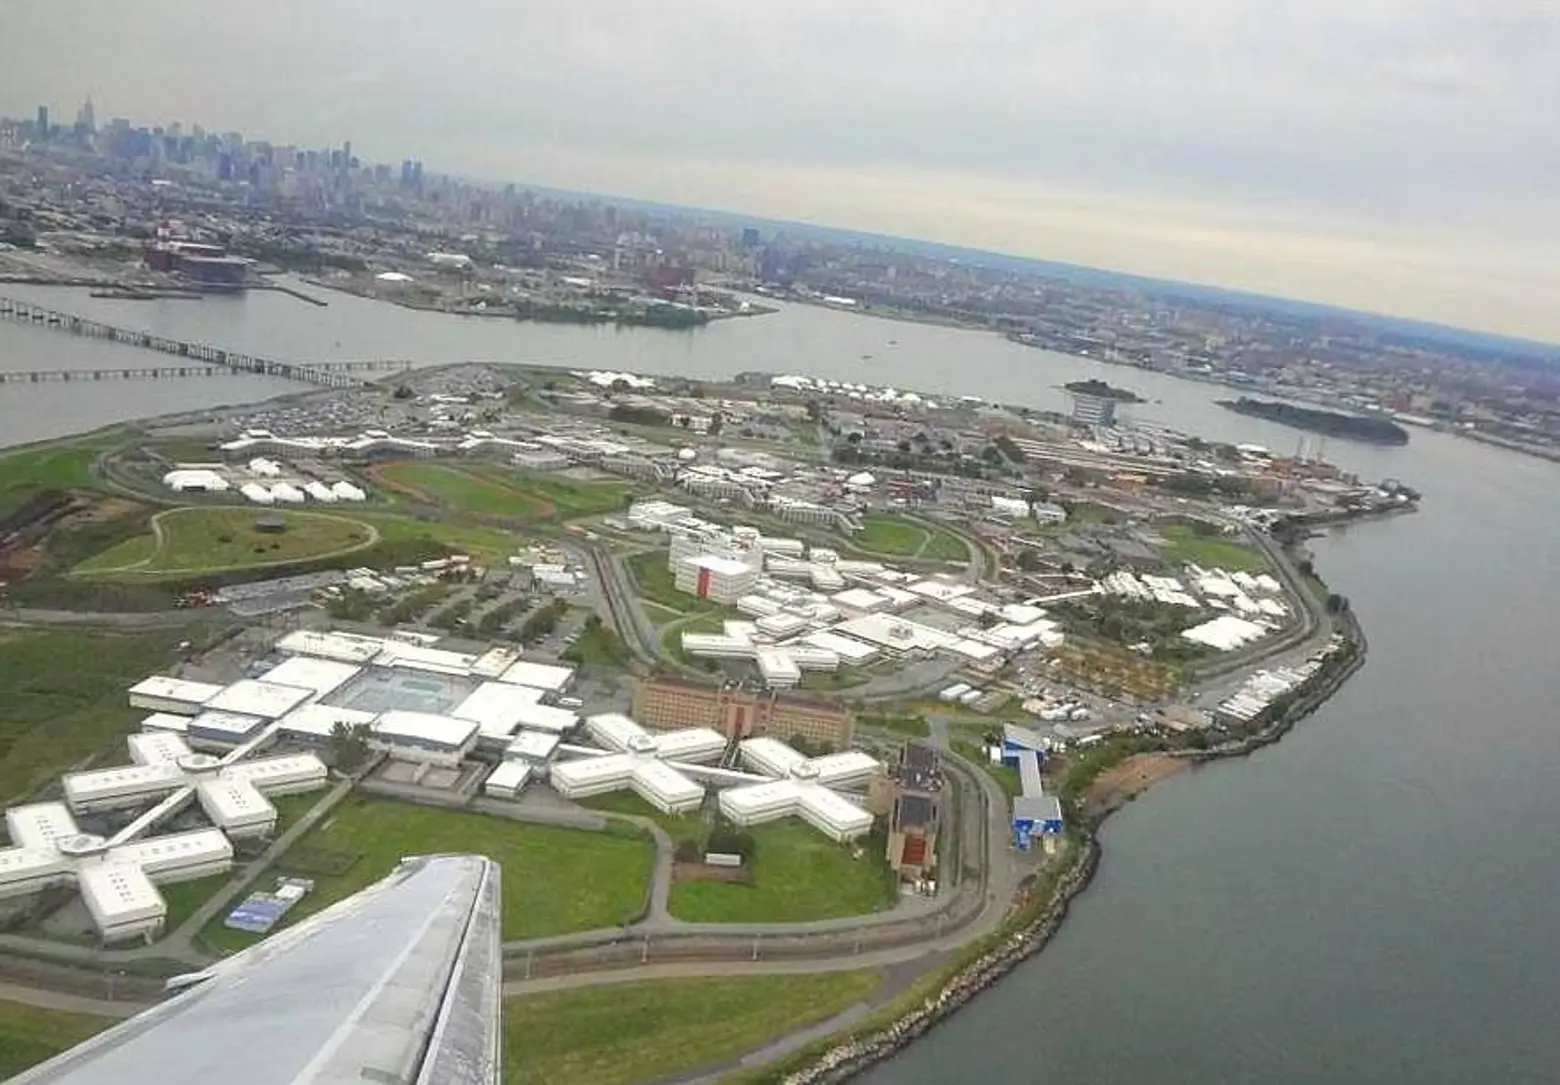 Mayor said to back Rikers closure after panel recommends new smaller jails across the city